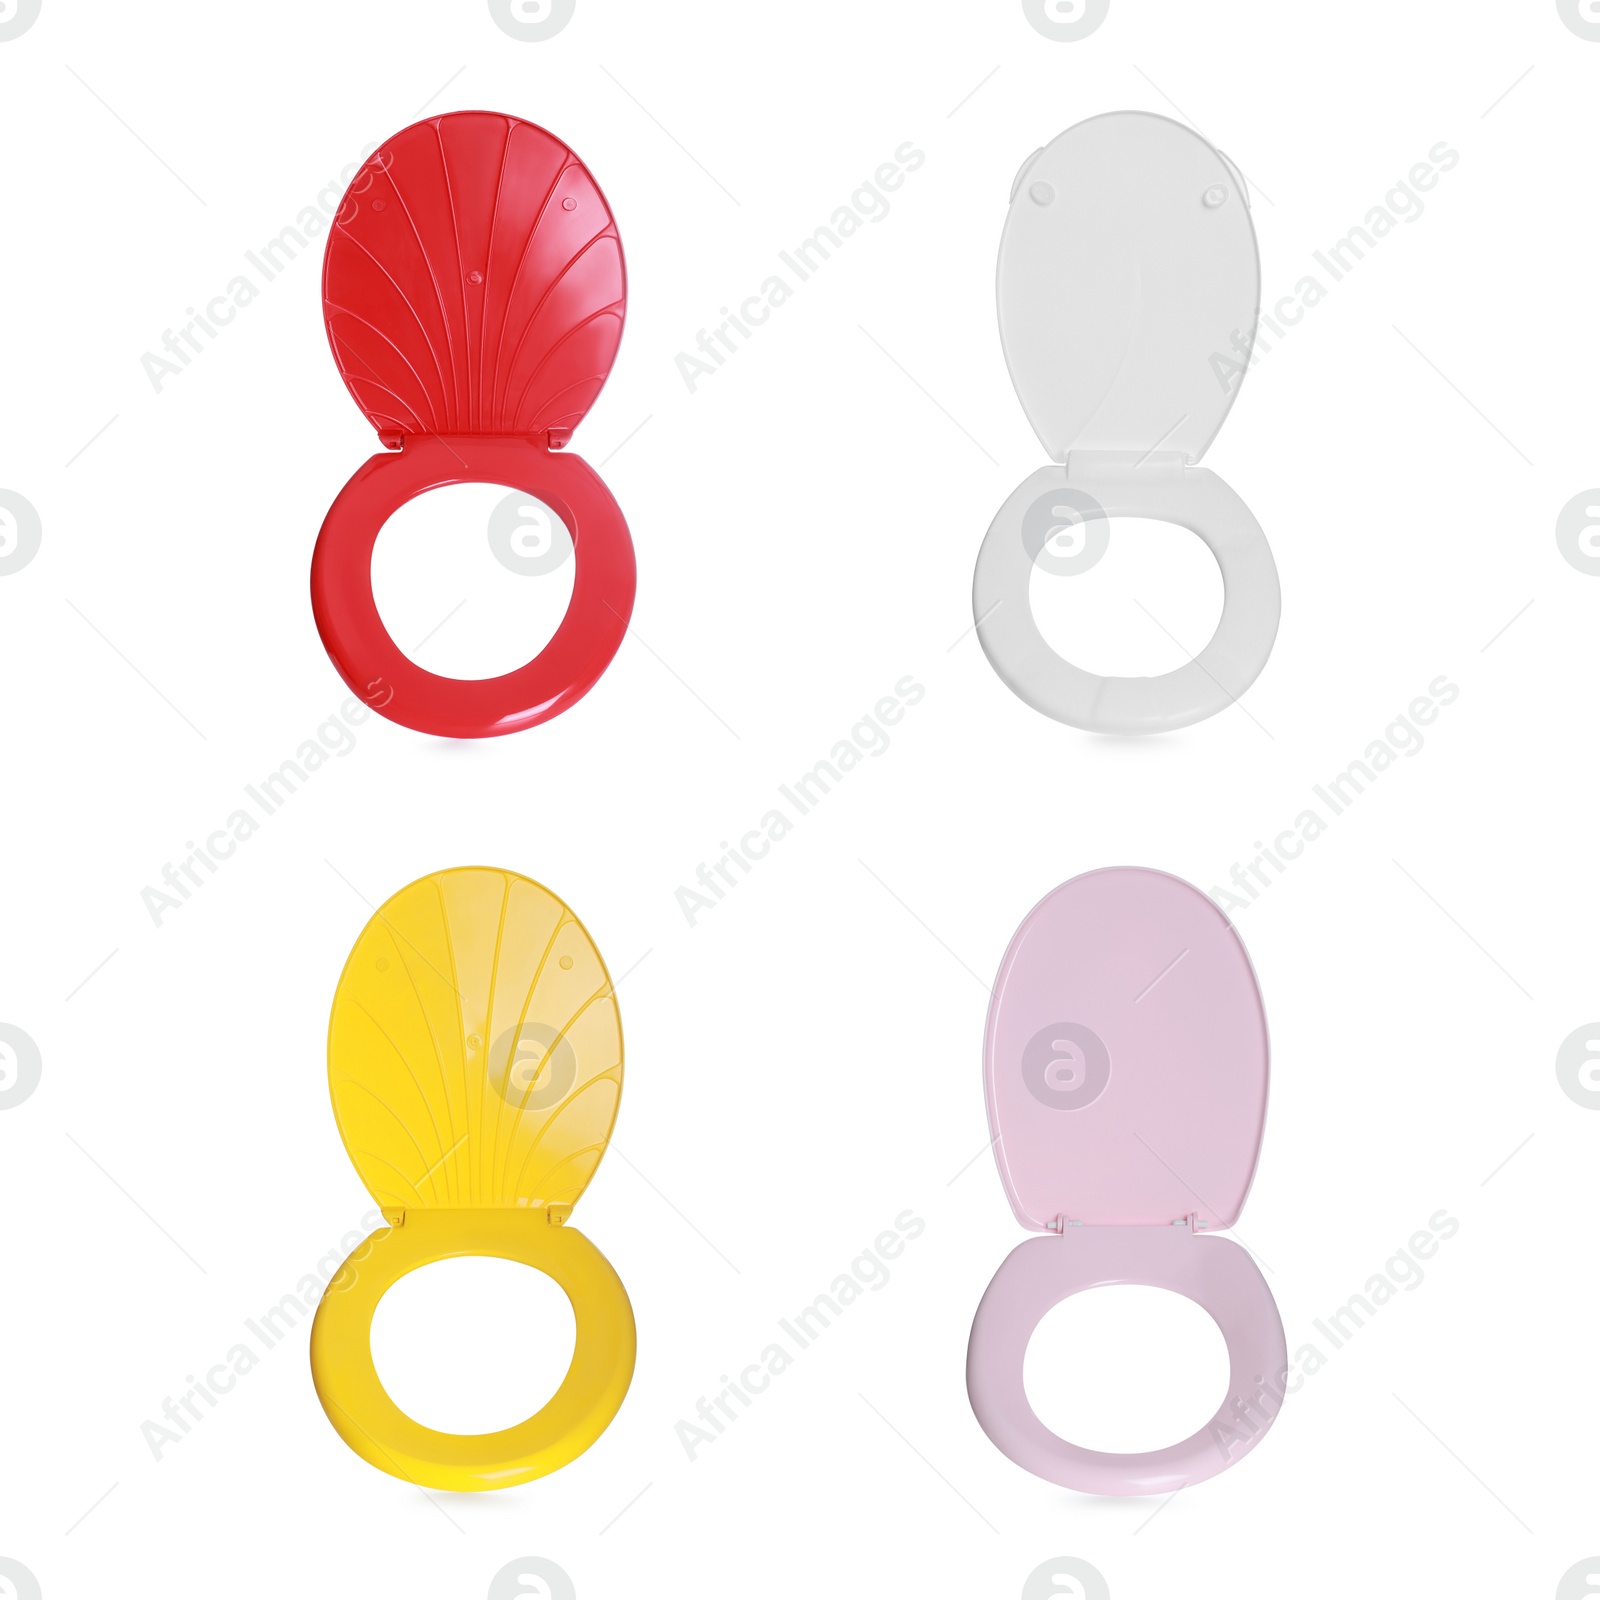 Image of Set with different plastic toilet seats on white background